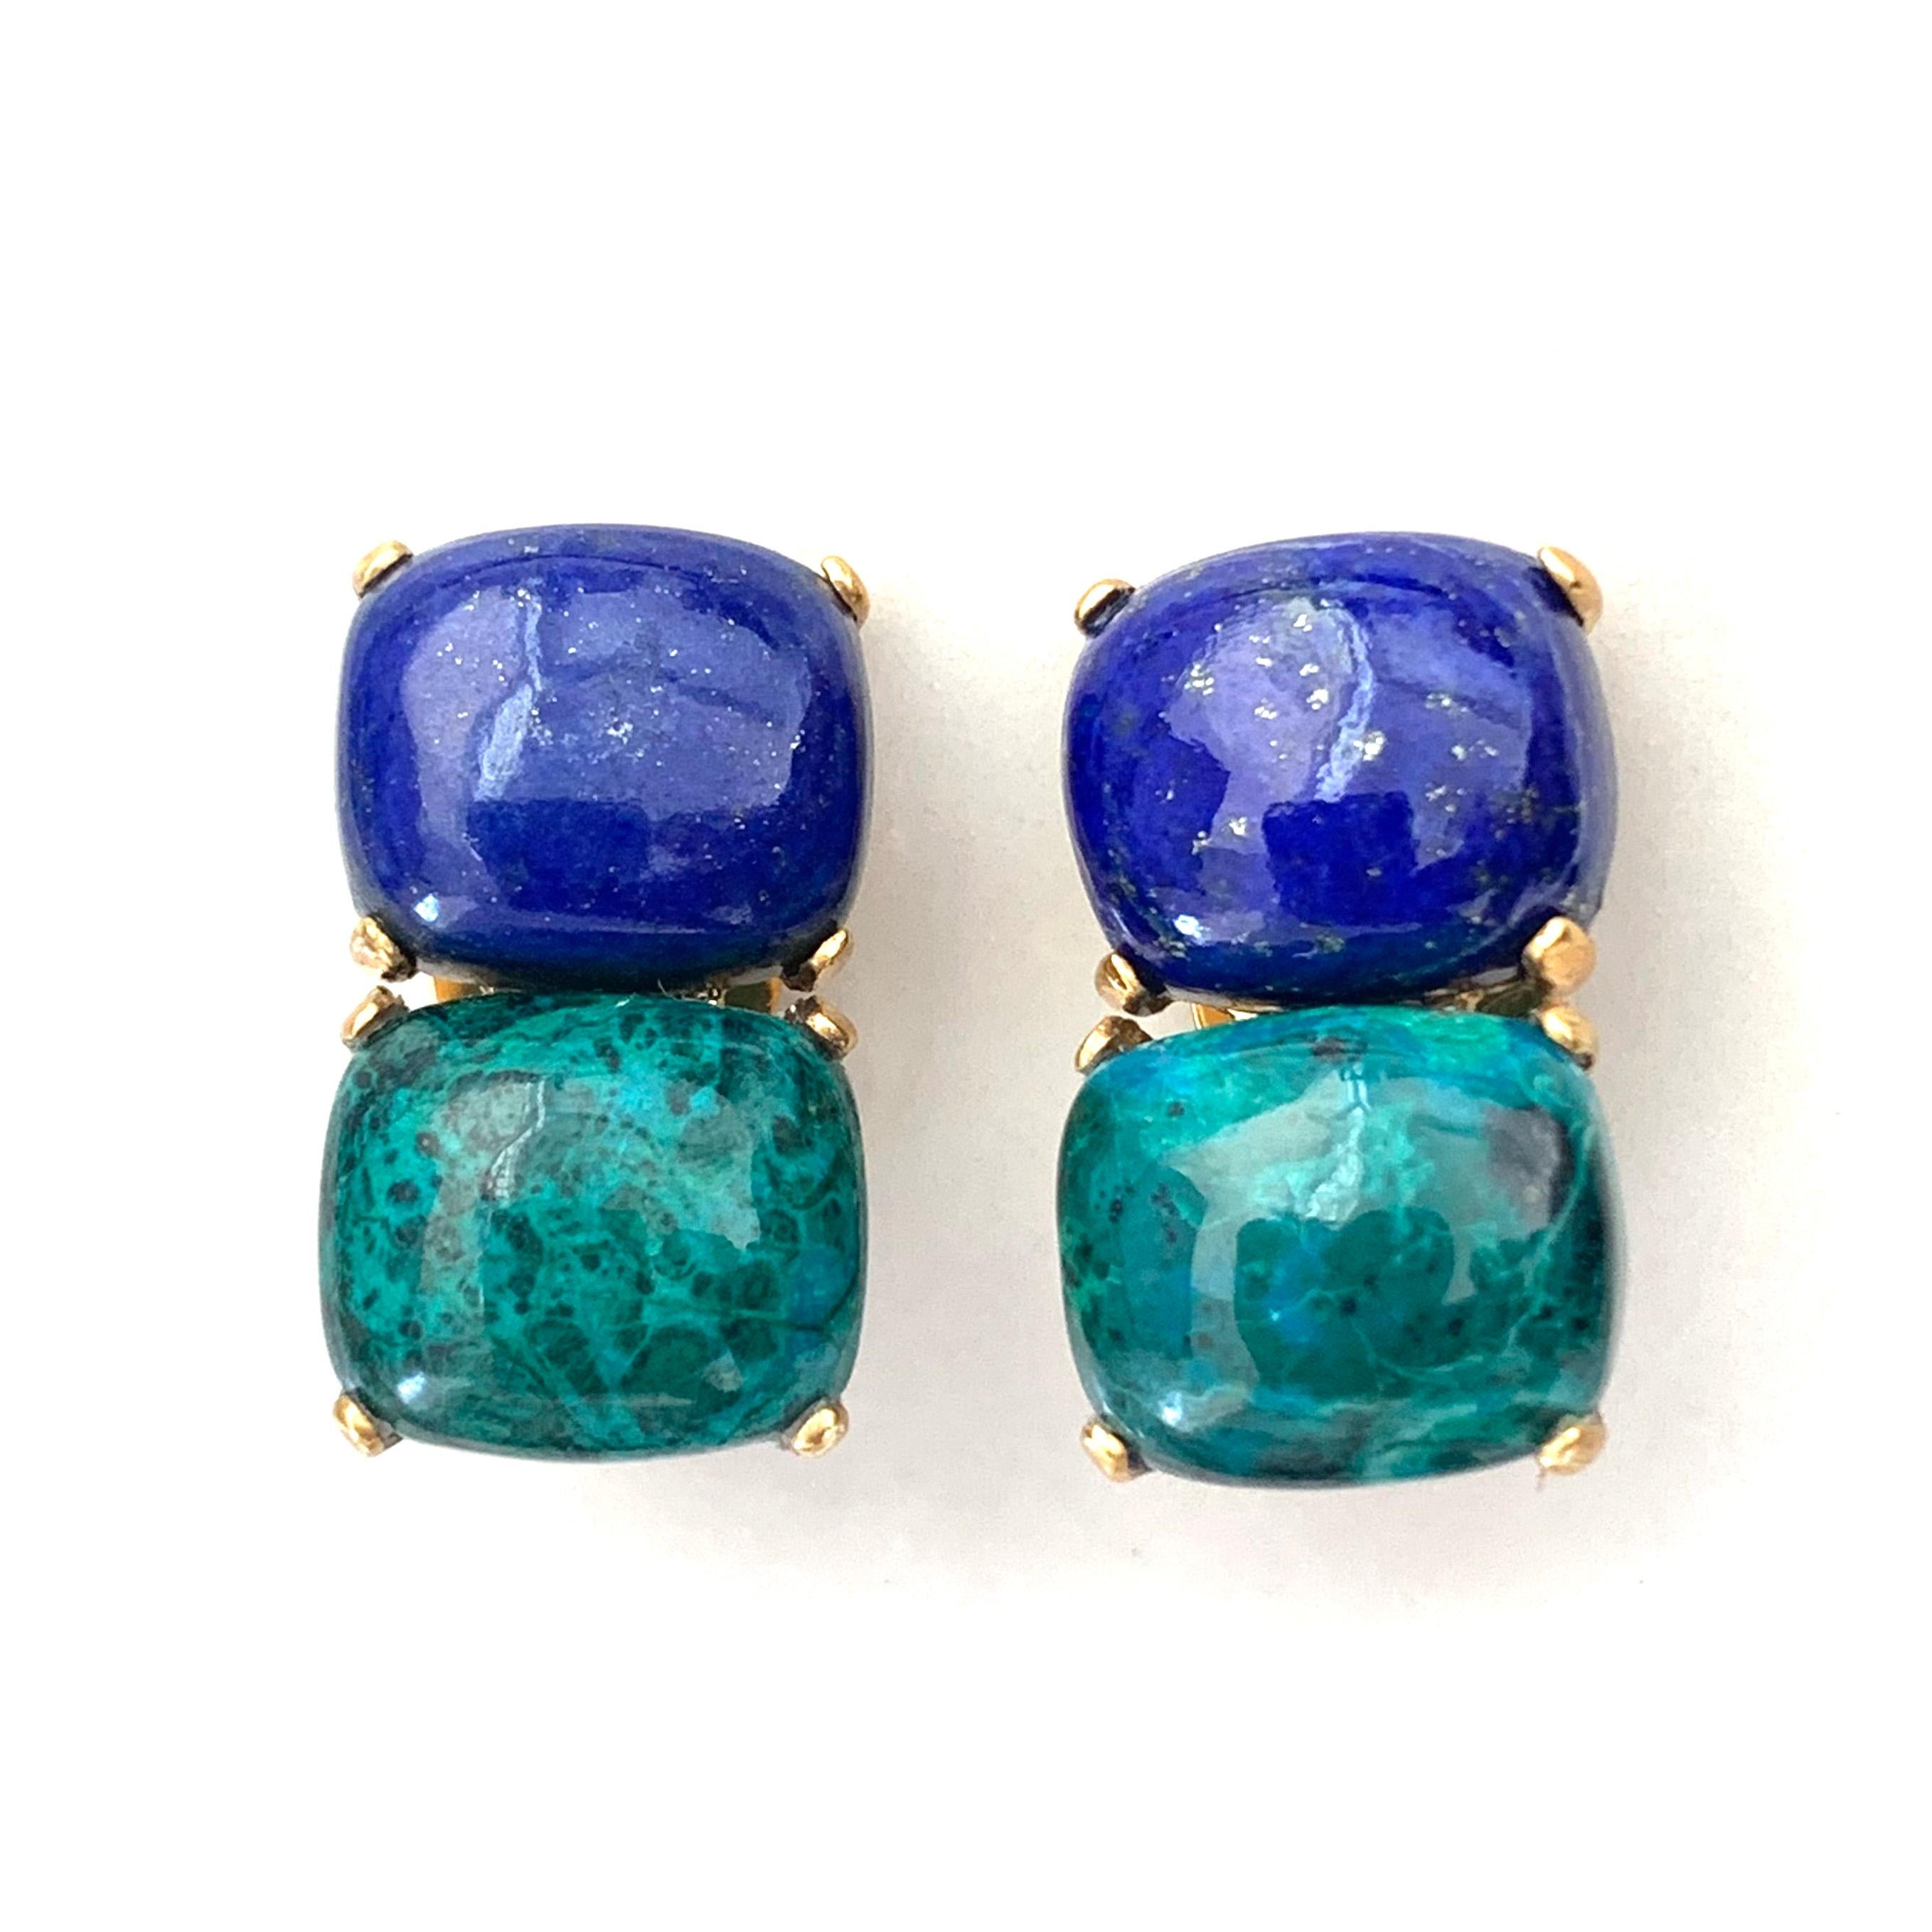 These stunning pair of earrings features 4 pieces of large cushion-shape cabochon-cut genuine lapis lazuli and chrysocolla, hand bezel-set in 18k yellow gold vermeil over sterling silver. The classic double design allows the earrings to show off the